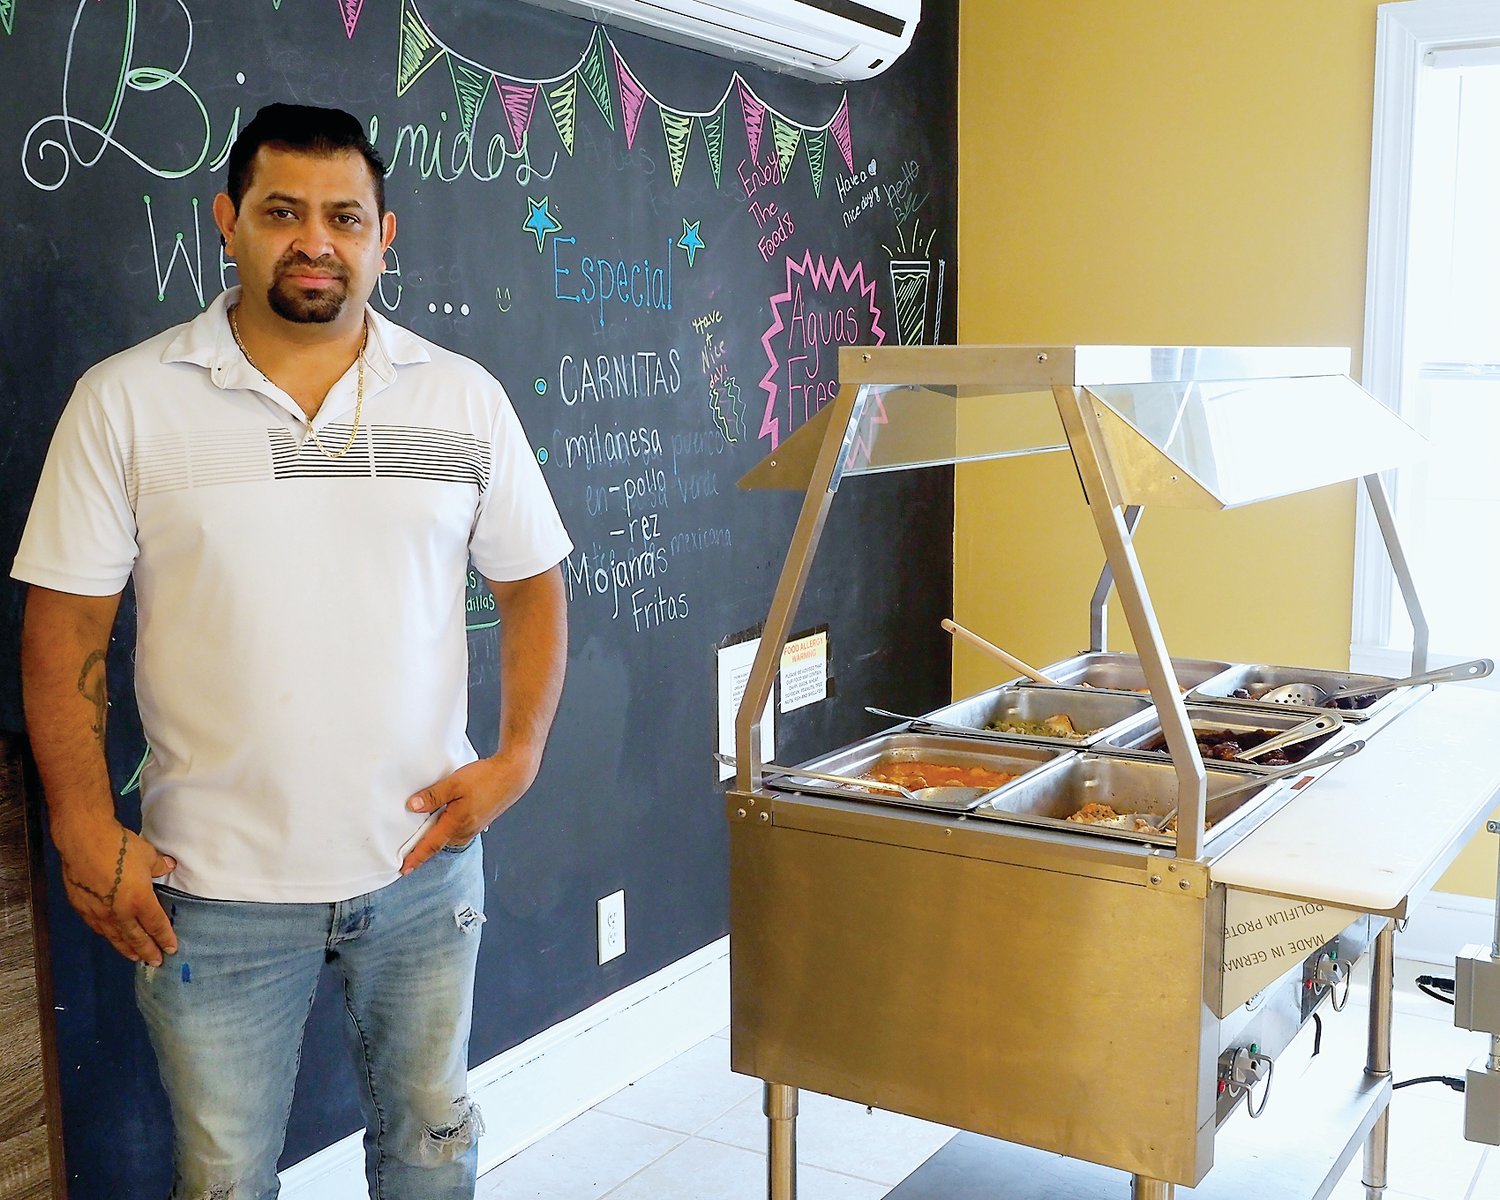 San Marcos Taqueria y Buffet's owner, Bernardo Gallegos Rodriguez, showcases the restaurant's new buffet station on Saturday. Located at 315 East Third Street, San Marcos first opened for business on May 15.